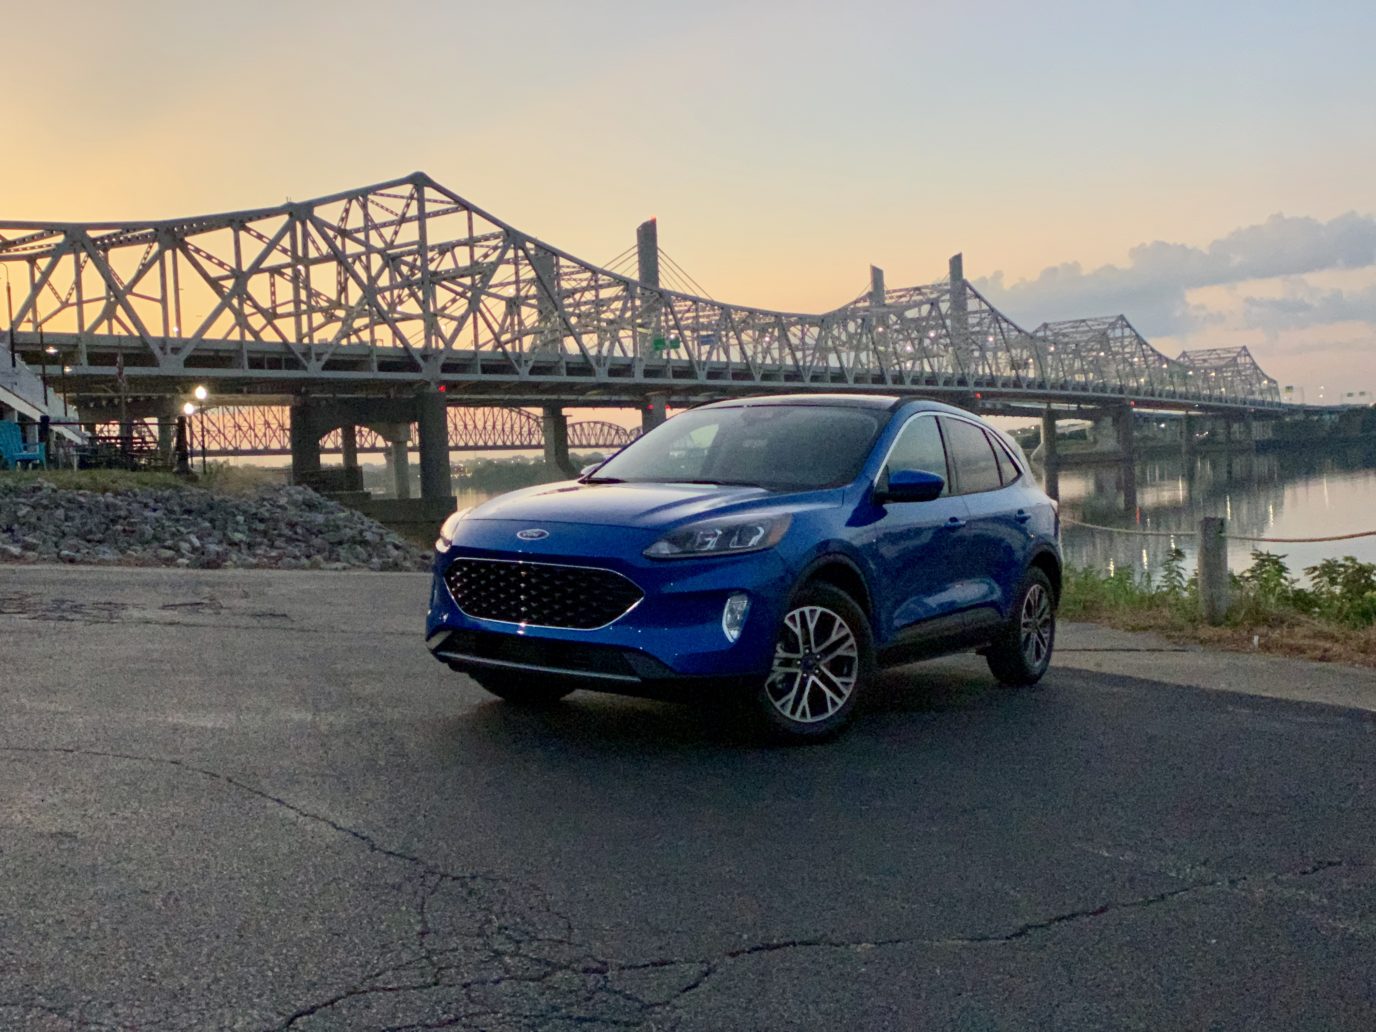 2020 Ford Escape First Drive Review: Redefining the Compact SUV